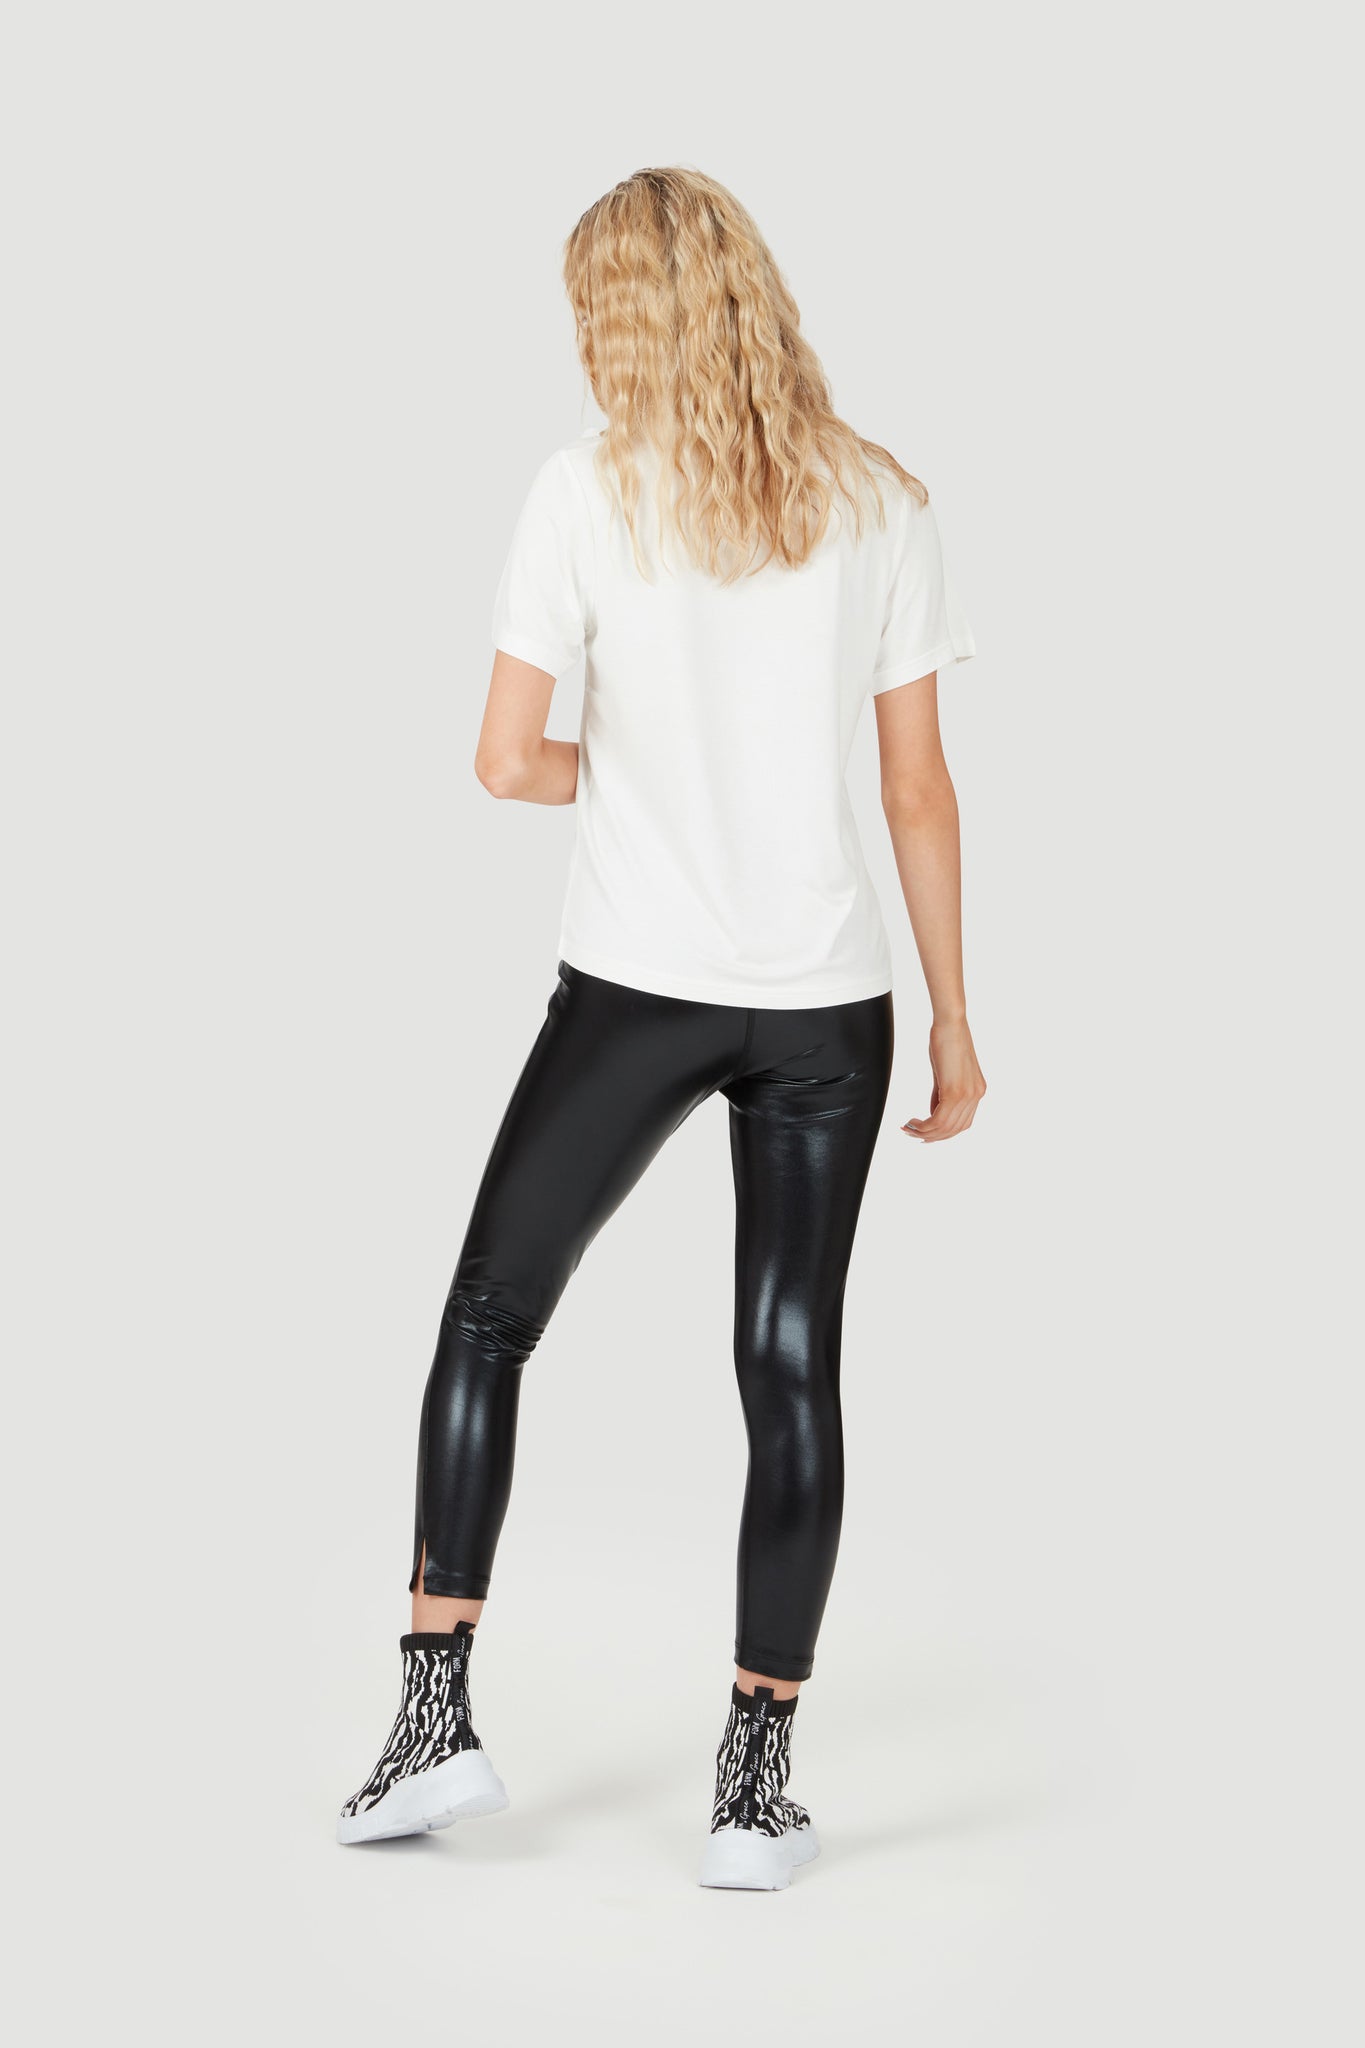 The Top 10 Shiny Workout Leggings | The Sports Edit